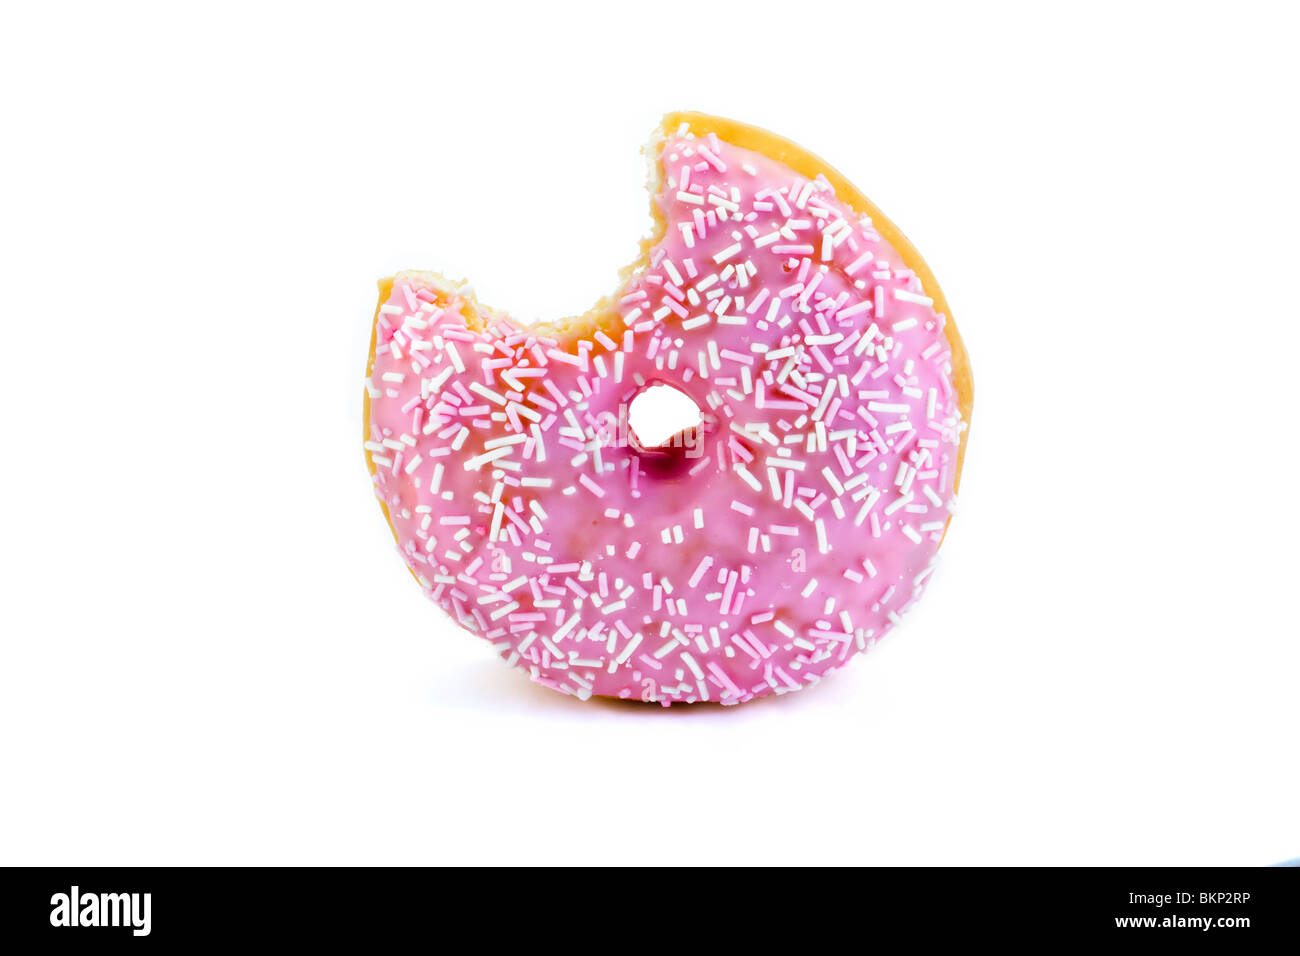 strawberry flavored doughnut with a bite taken out isolated on white Stock Photo